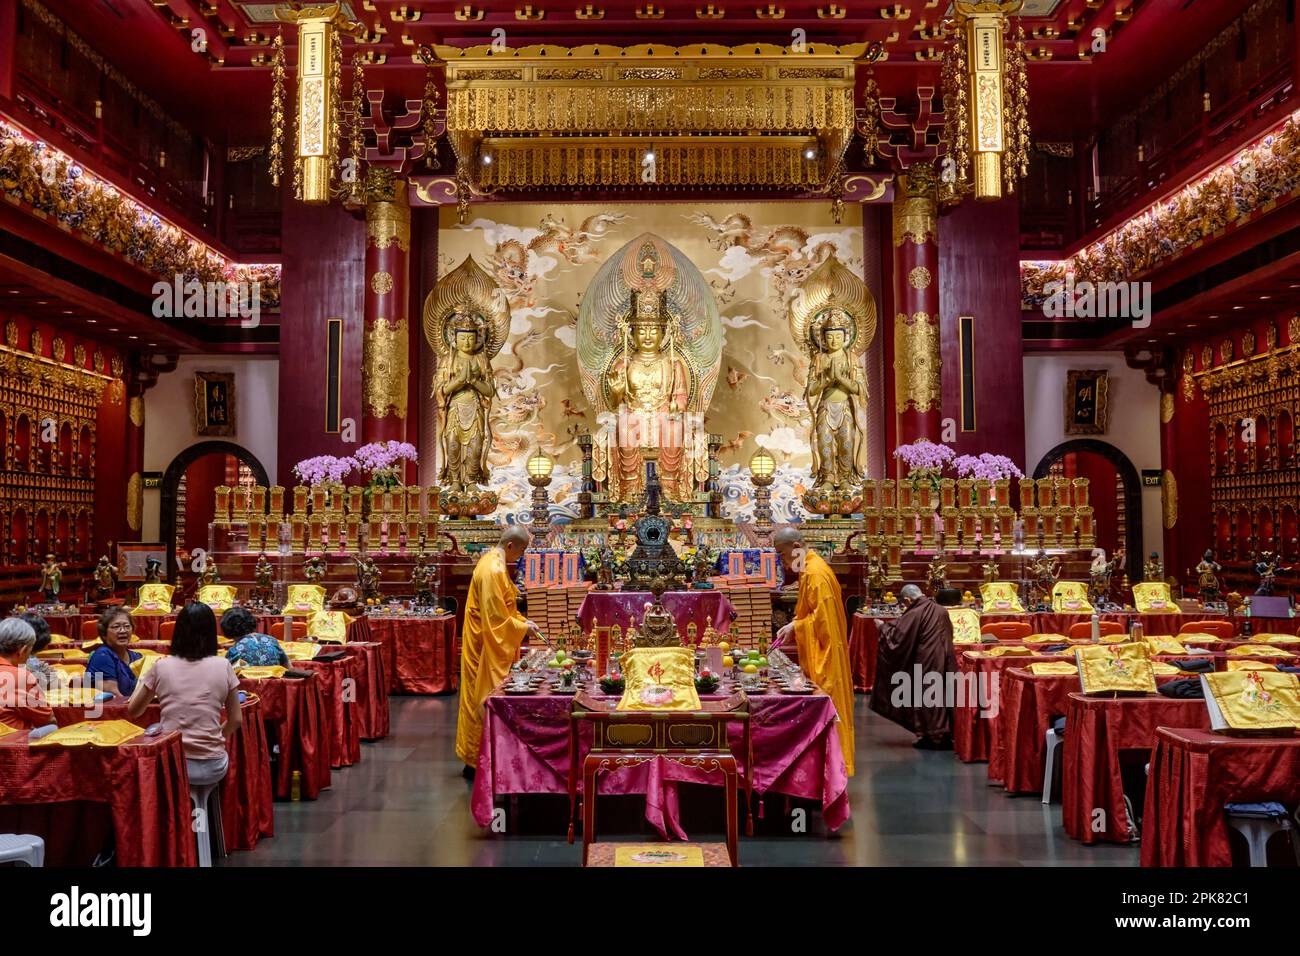 Buddhist monks are performing prayers at the main shrine in the Buddha Tooth Temple and Museum, Chinatown, Singapore Stock Photo